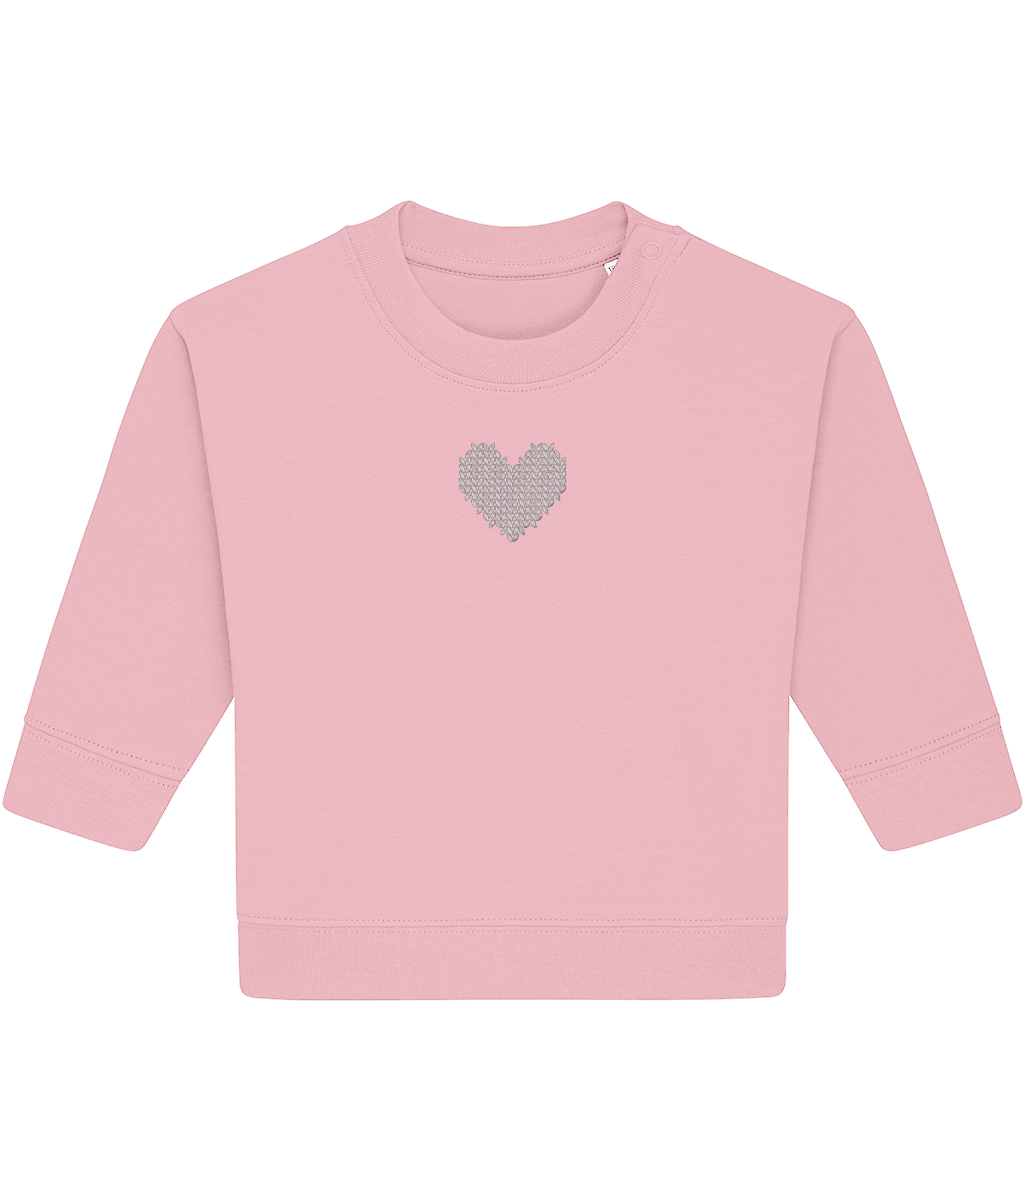 Made with Love Baby Embroidered White Heart Long Sleeve